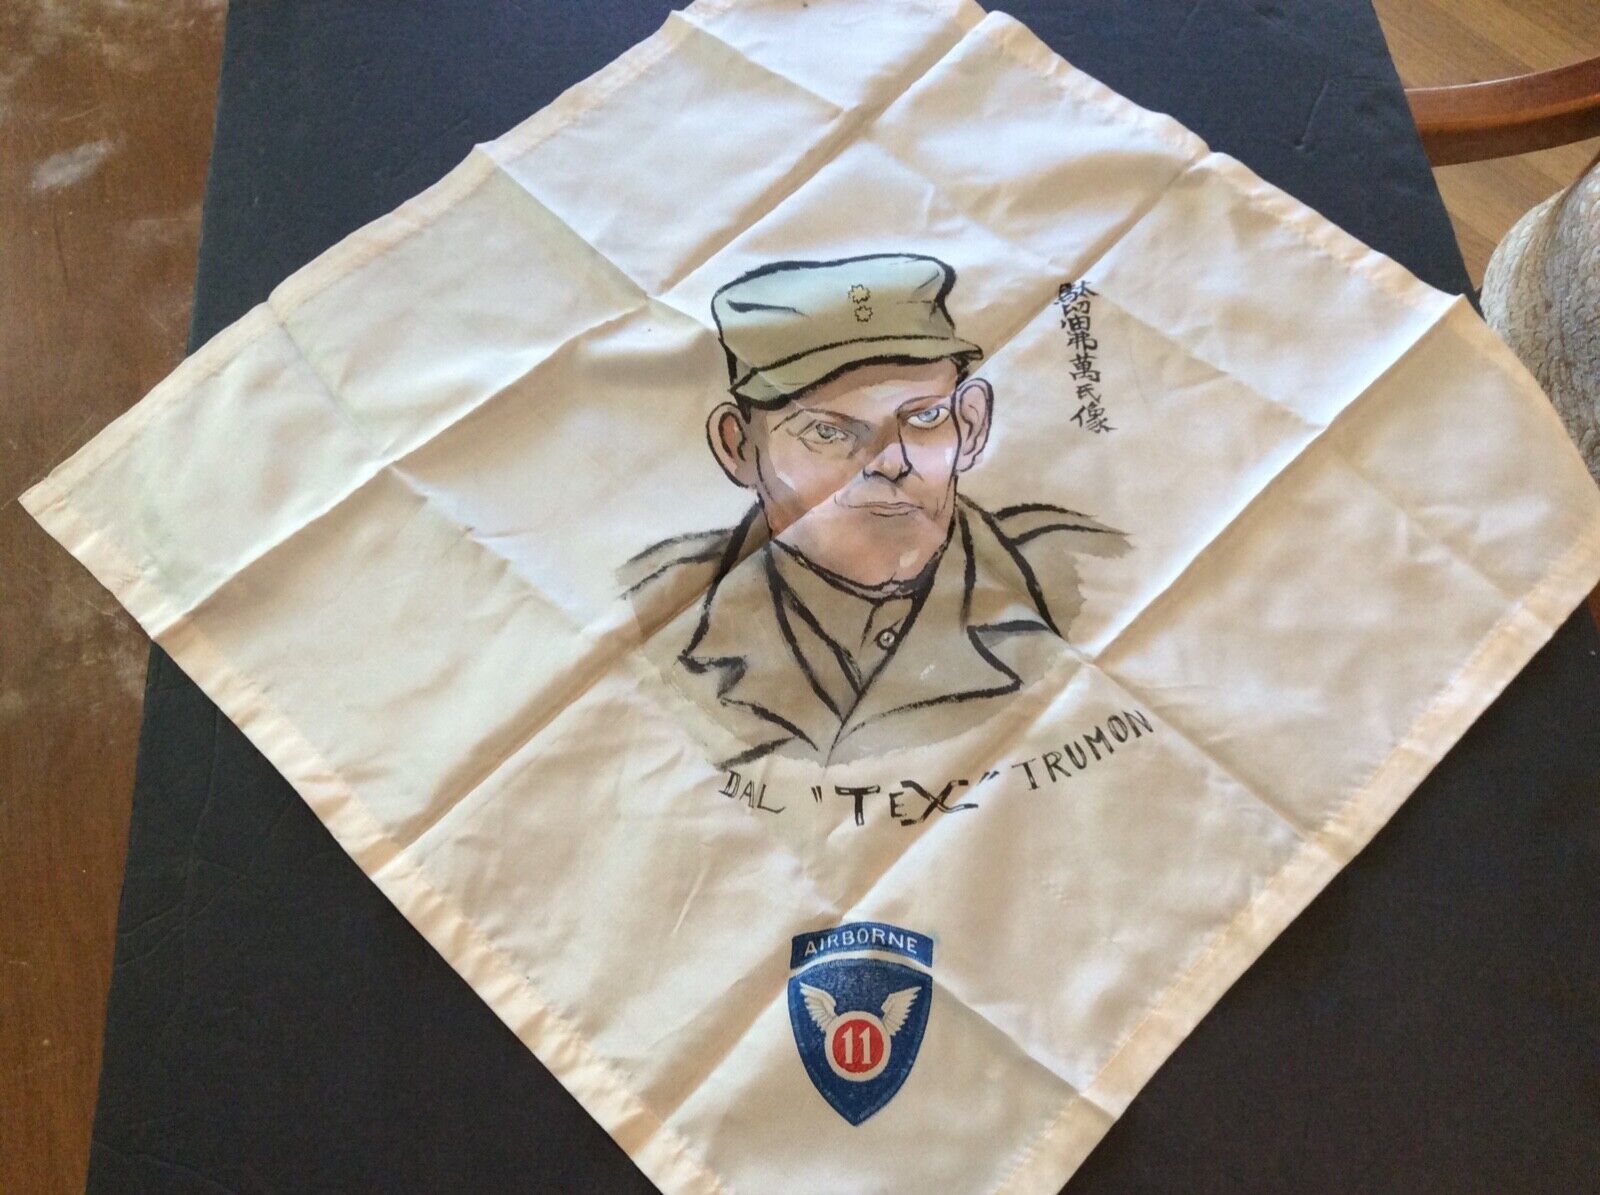 MILITARY HANDKERCHIEF, 11th AIRBORNE, ASIA, PORTRAIT SCARF, NAMED. 1950’s?